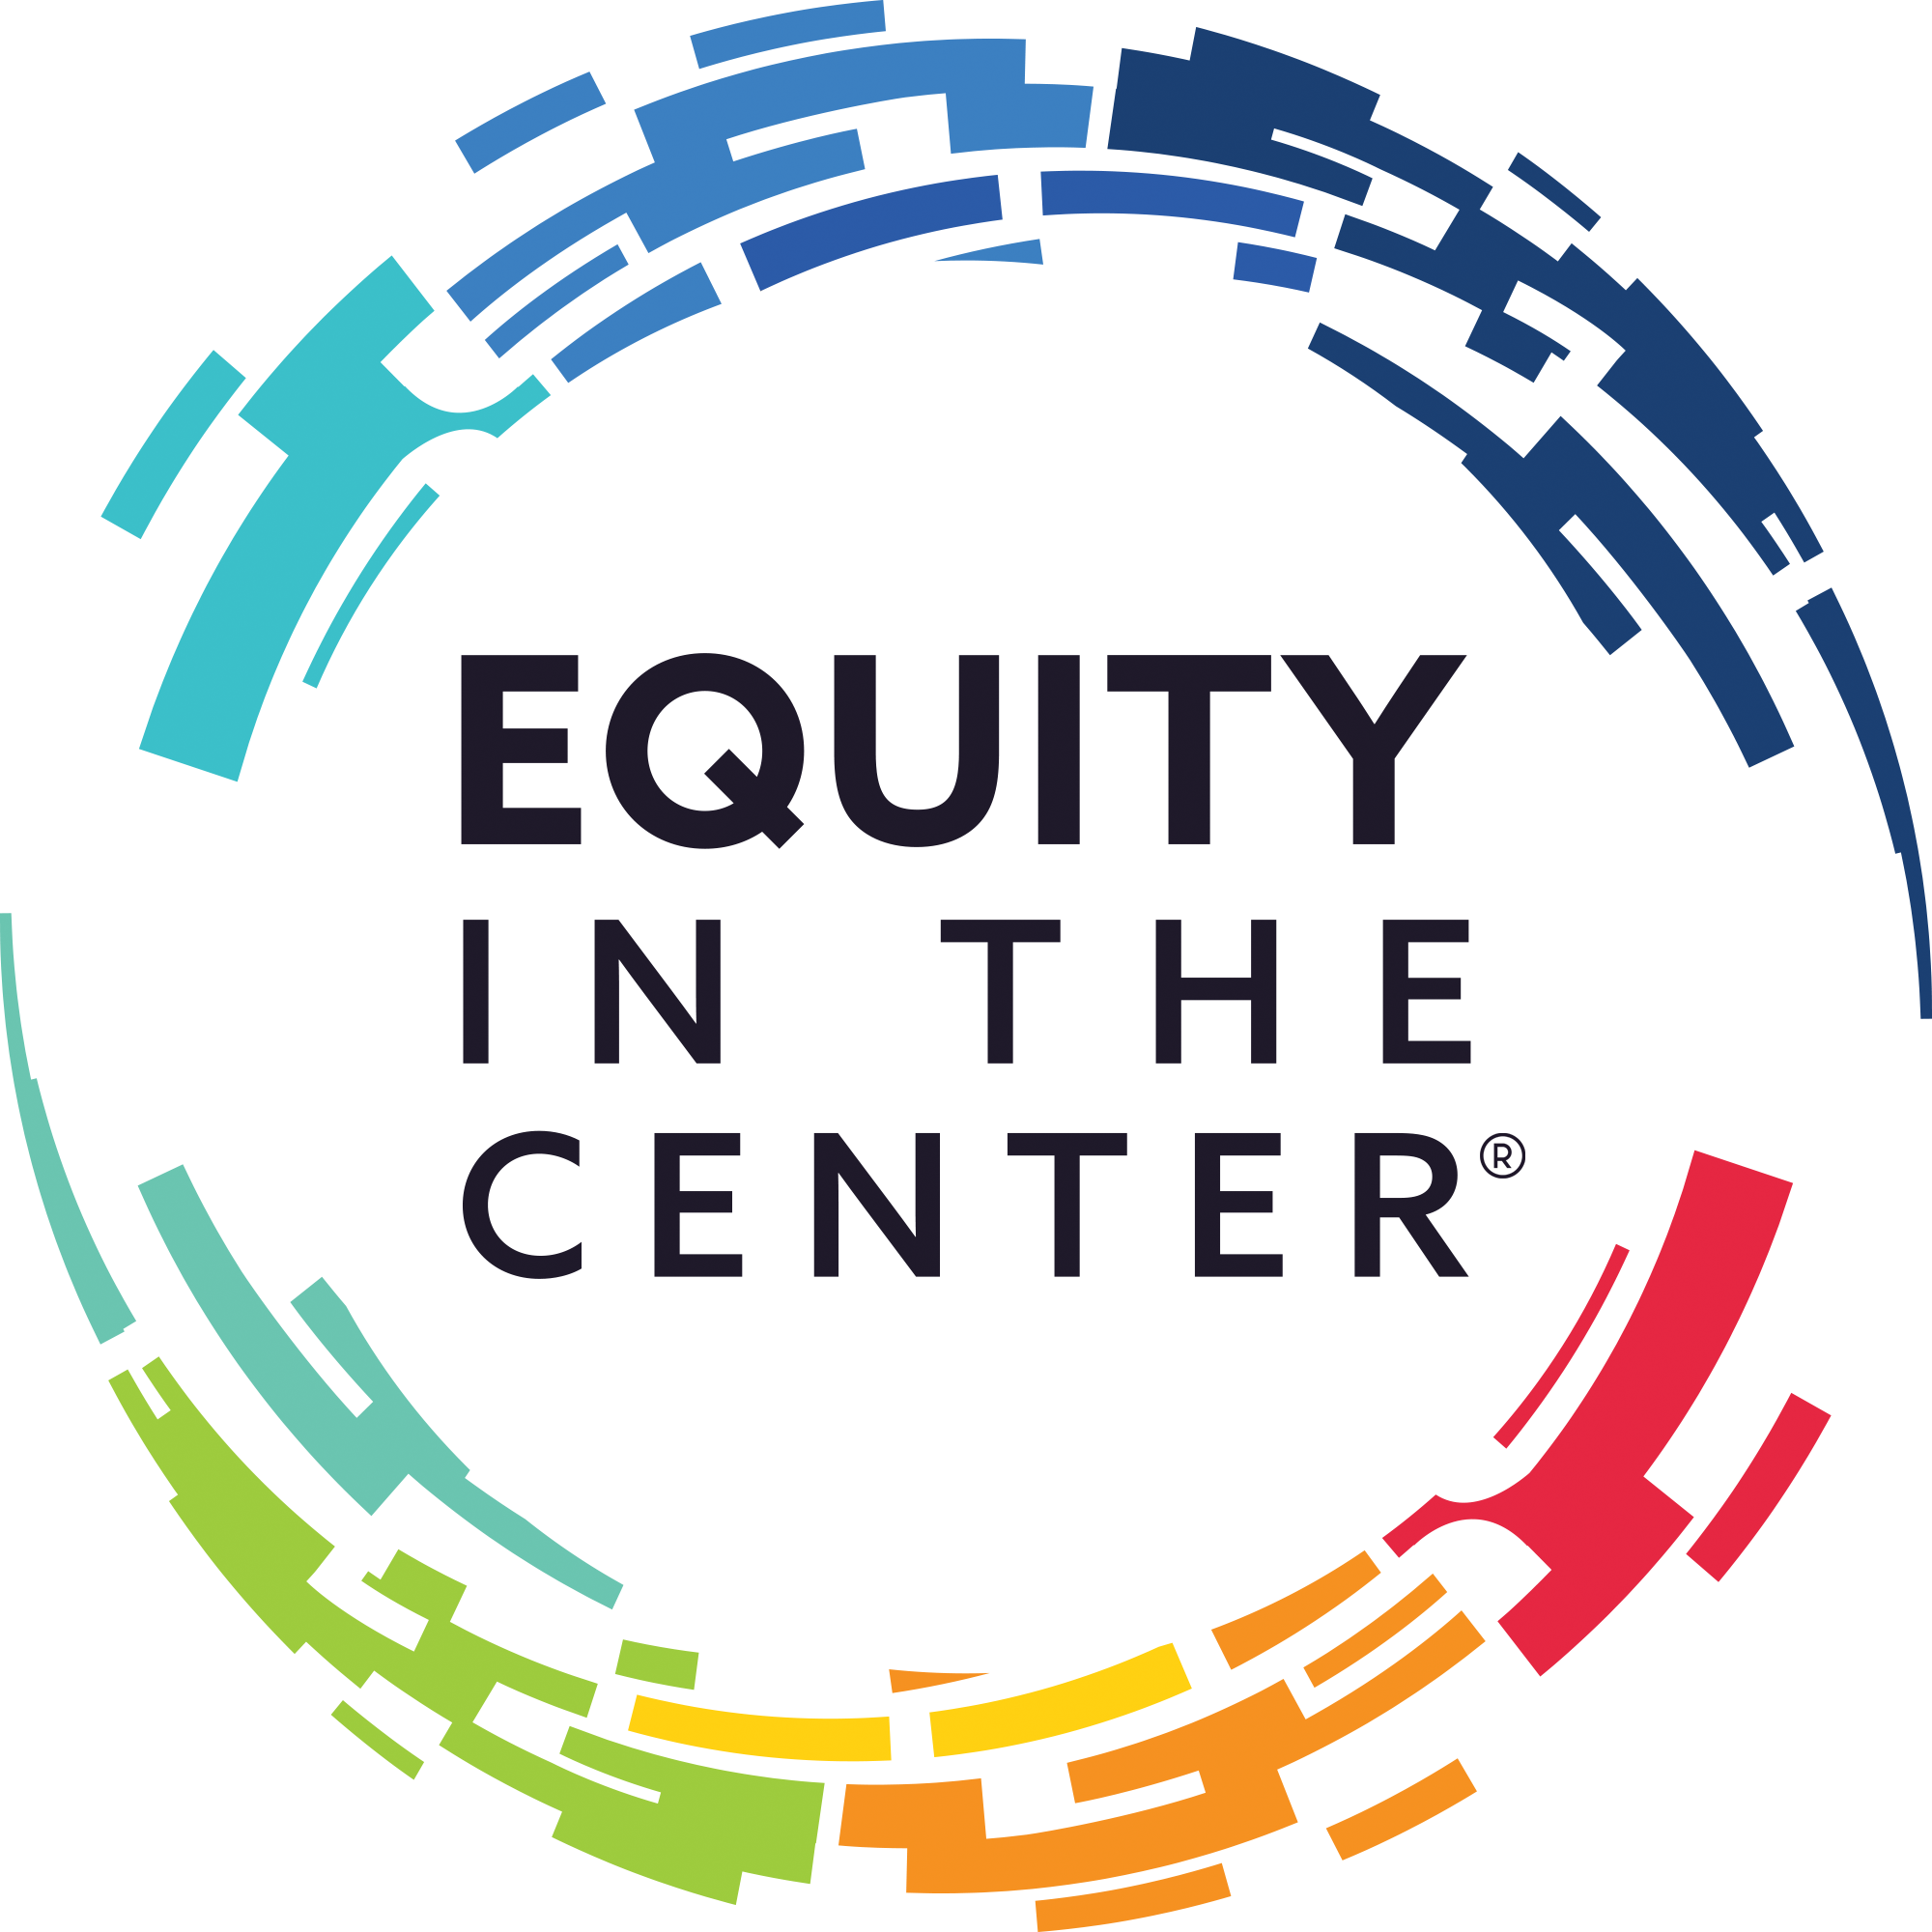 Equity in the Center logo